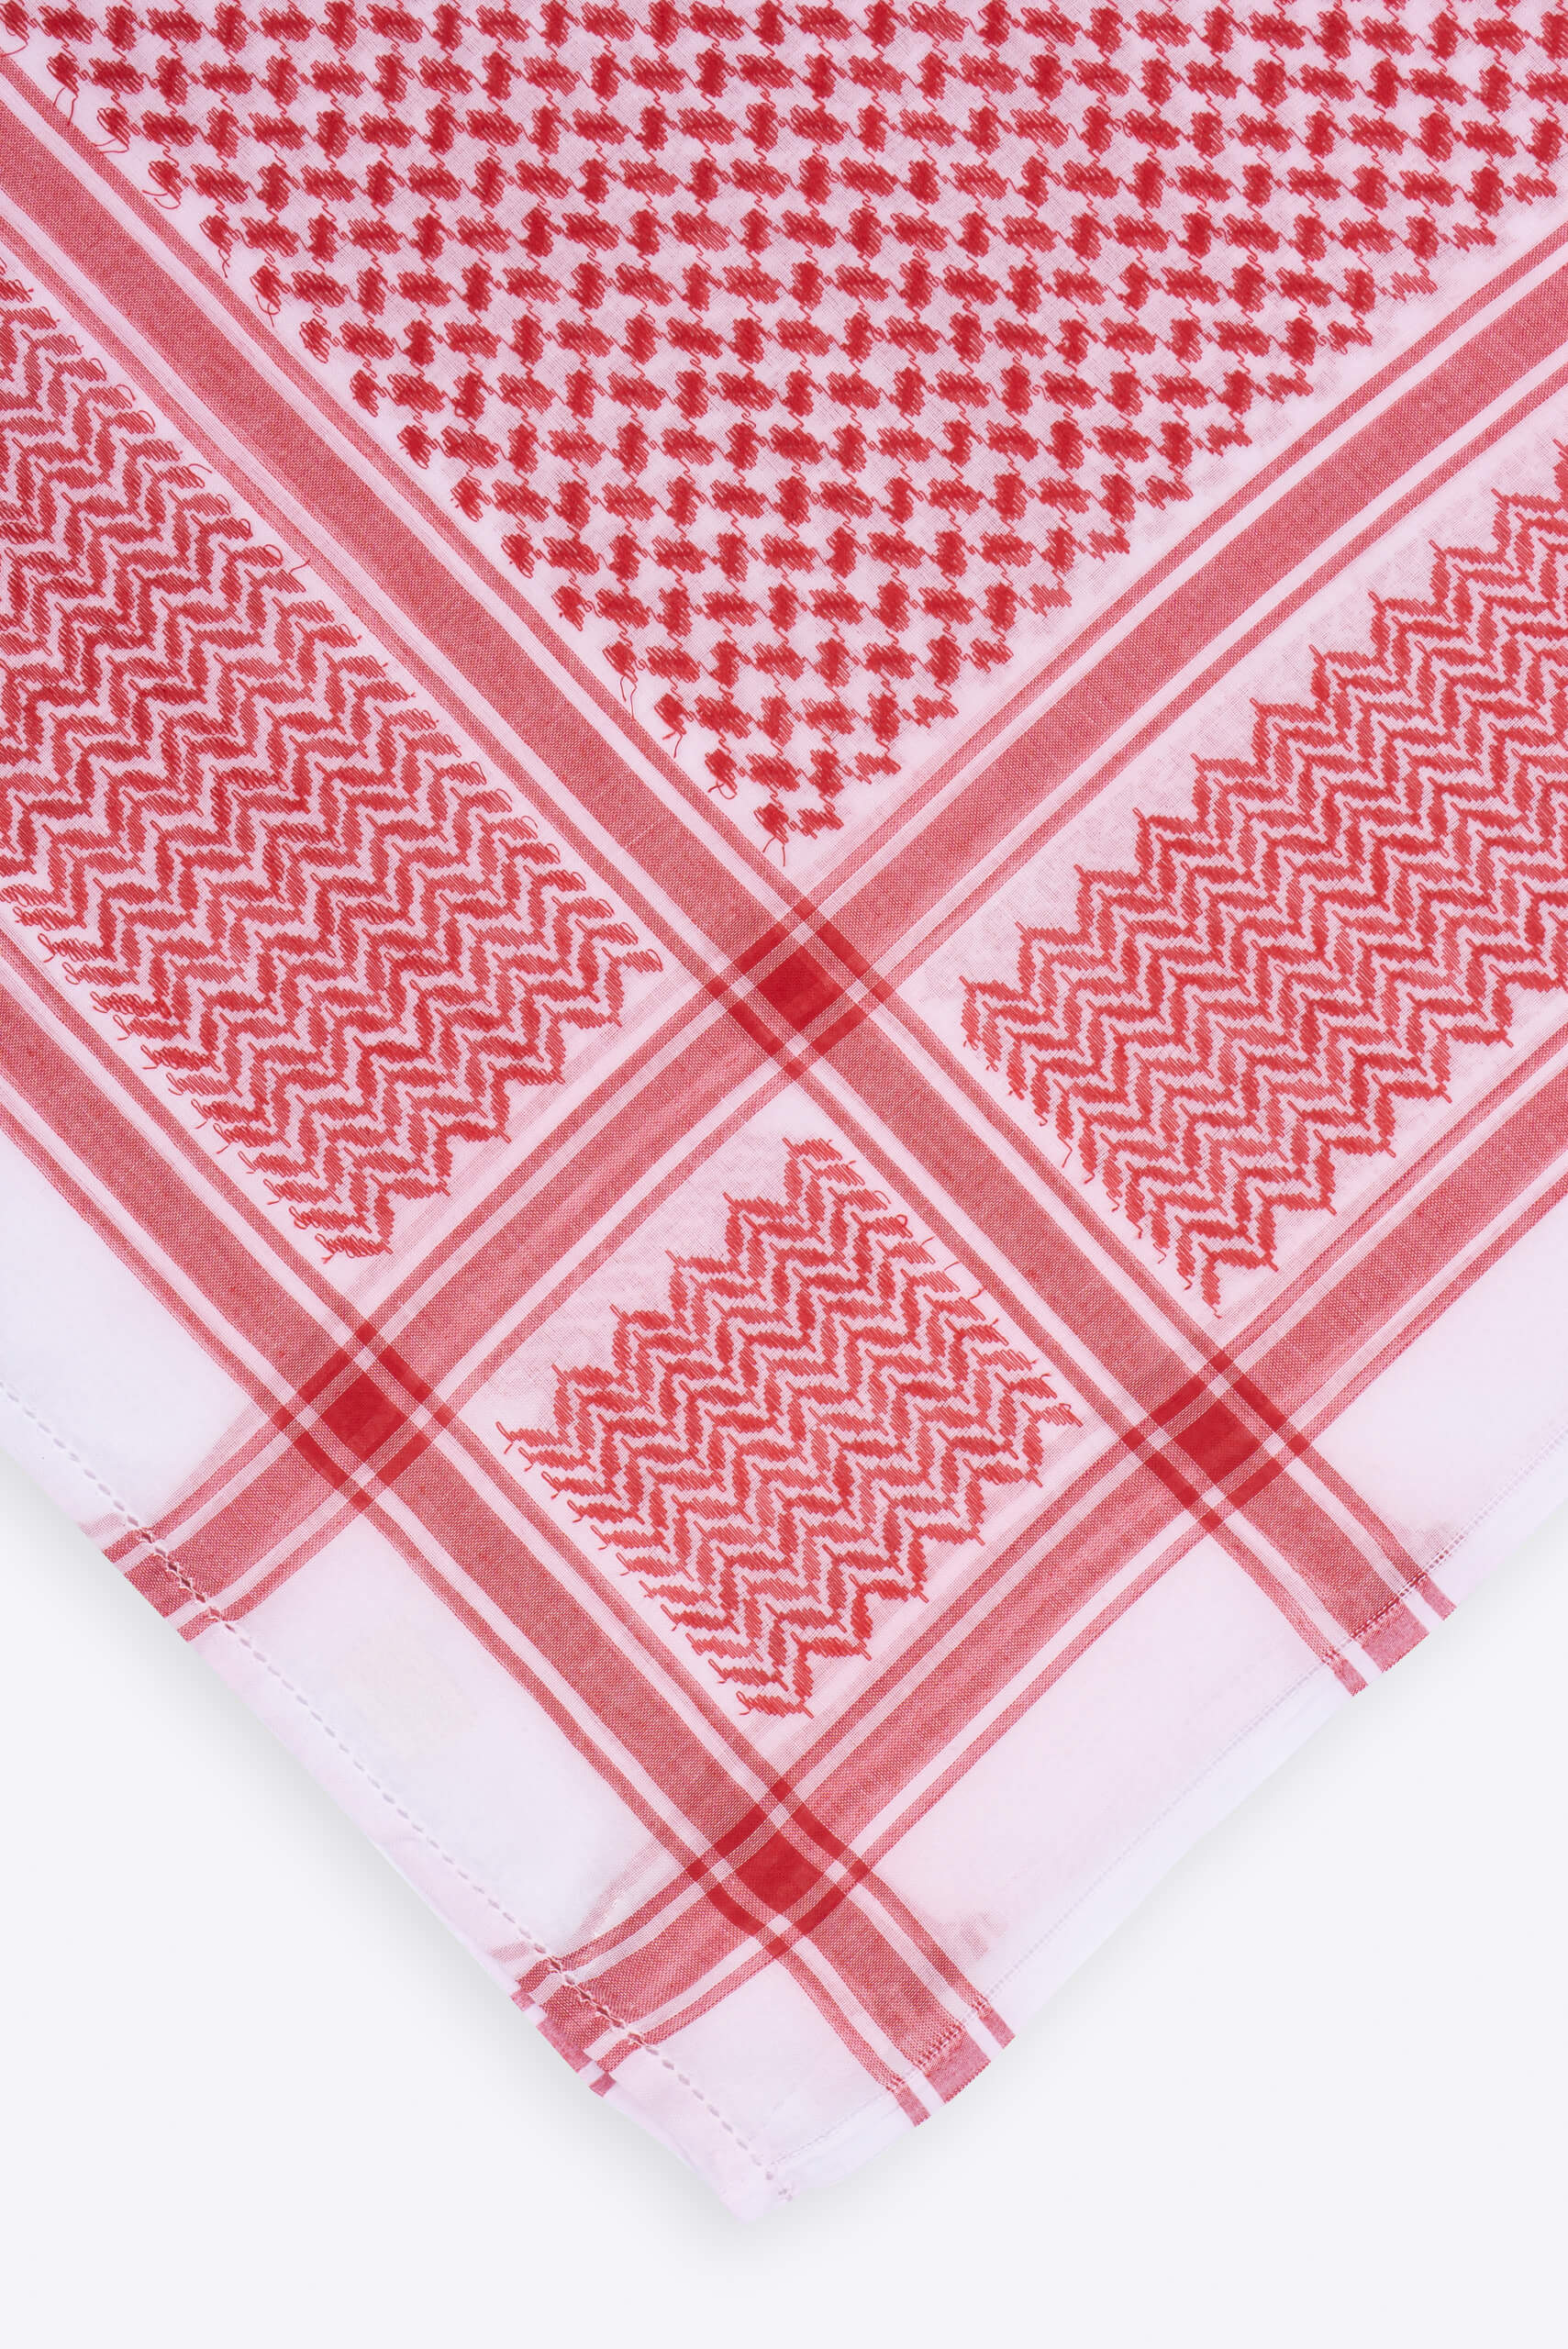 Saudi Red Shemagh - Shemagh Scarf - Muslim Lifestyle Store